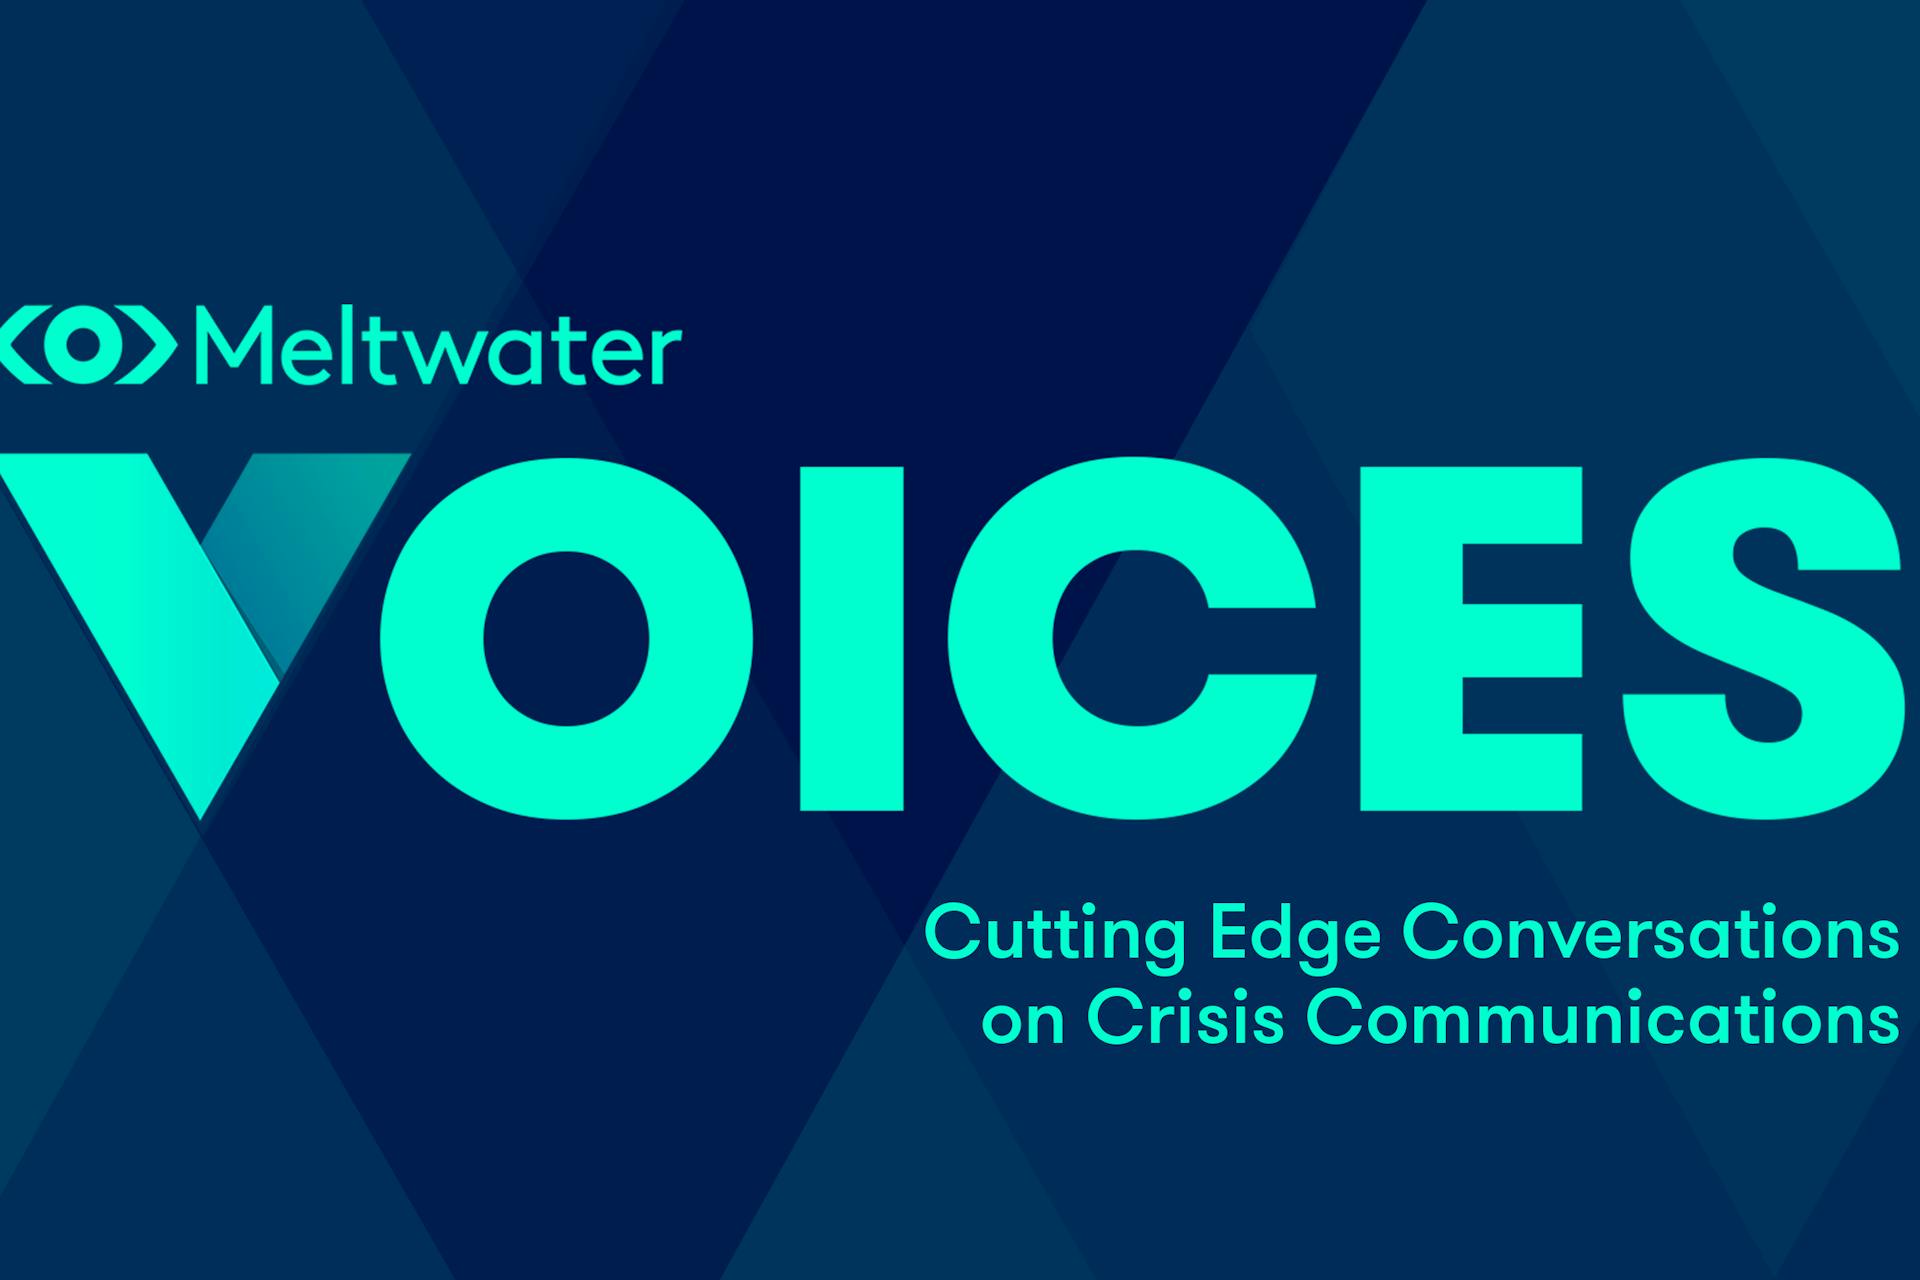 Meltwater Voices Banner about "Cutting Edge Conversations on Crisis Communications"